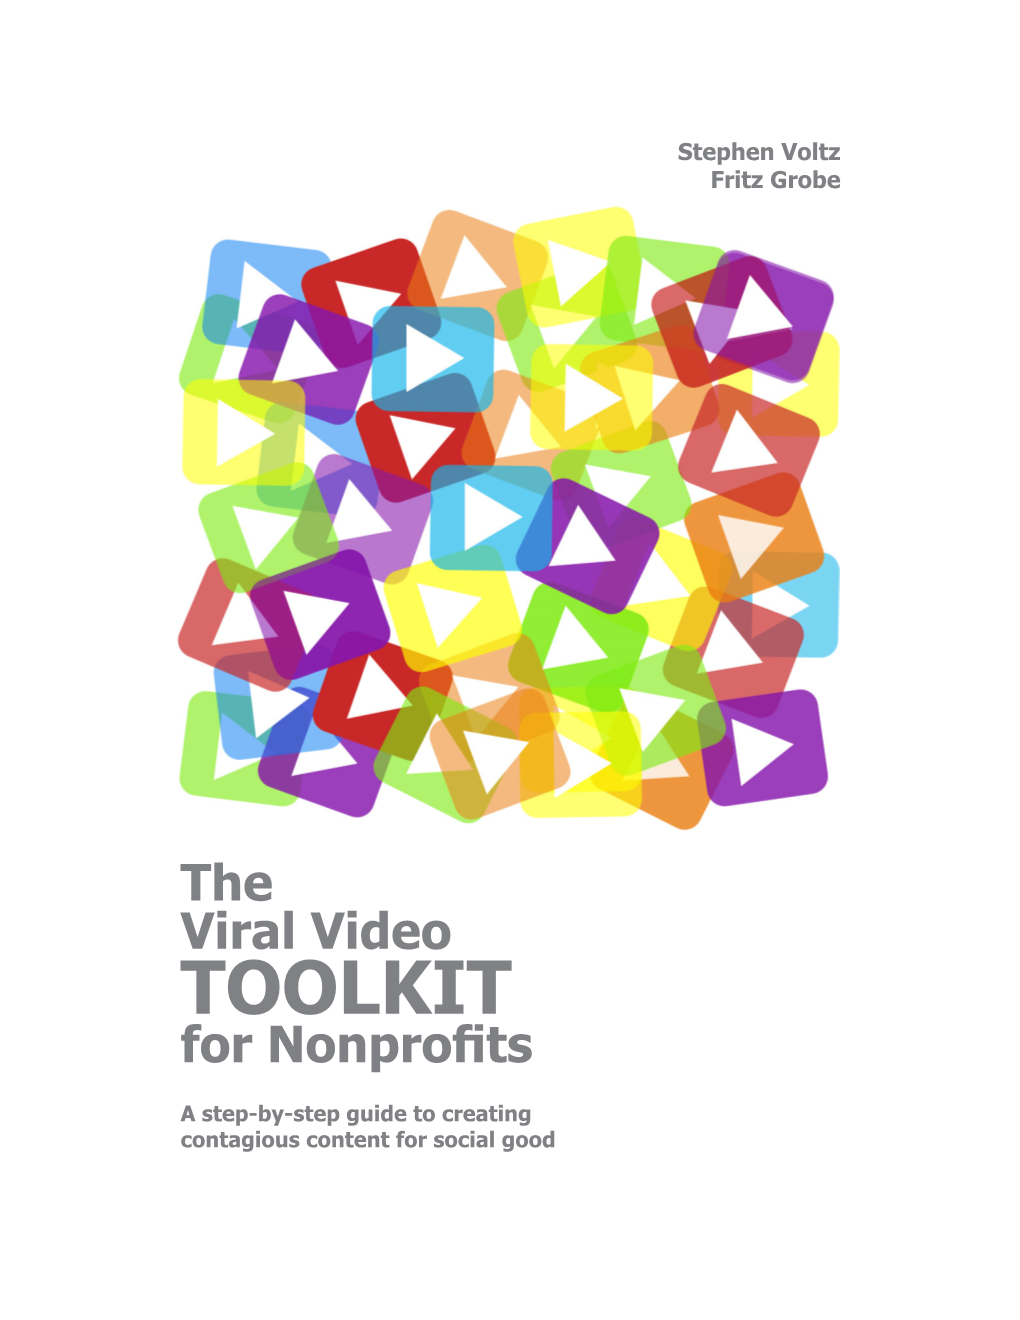 The Viral Video TOOLKIT for Nonprofits